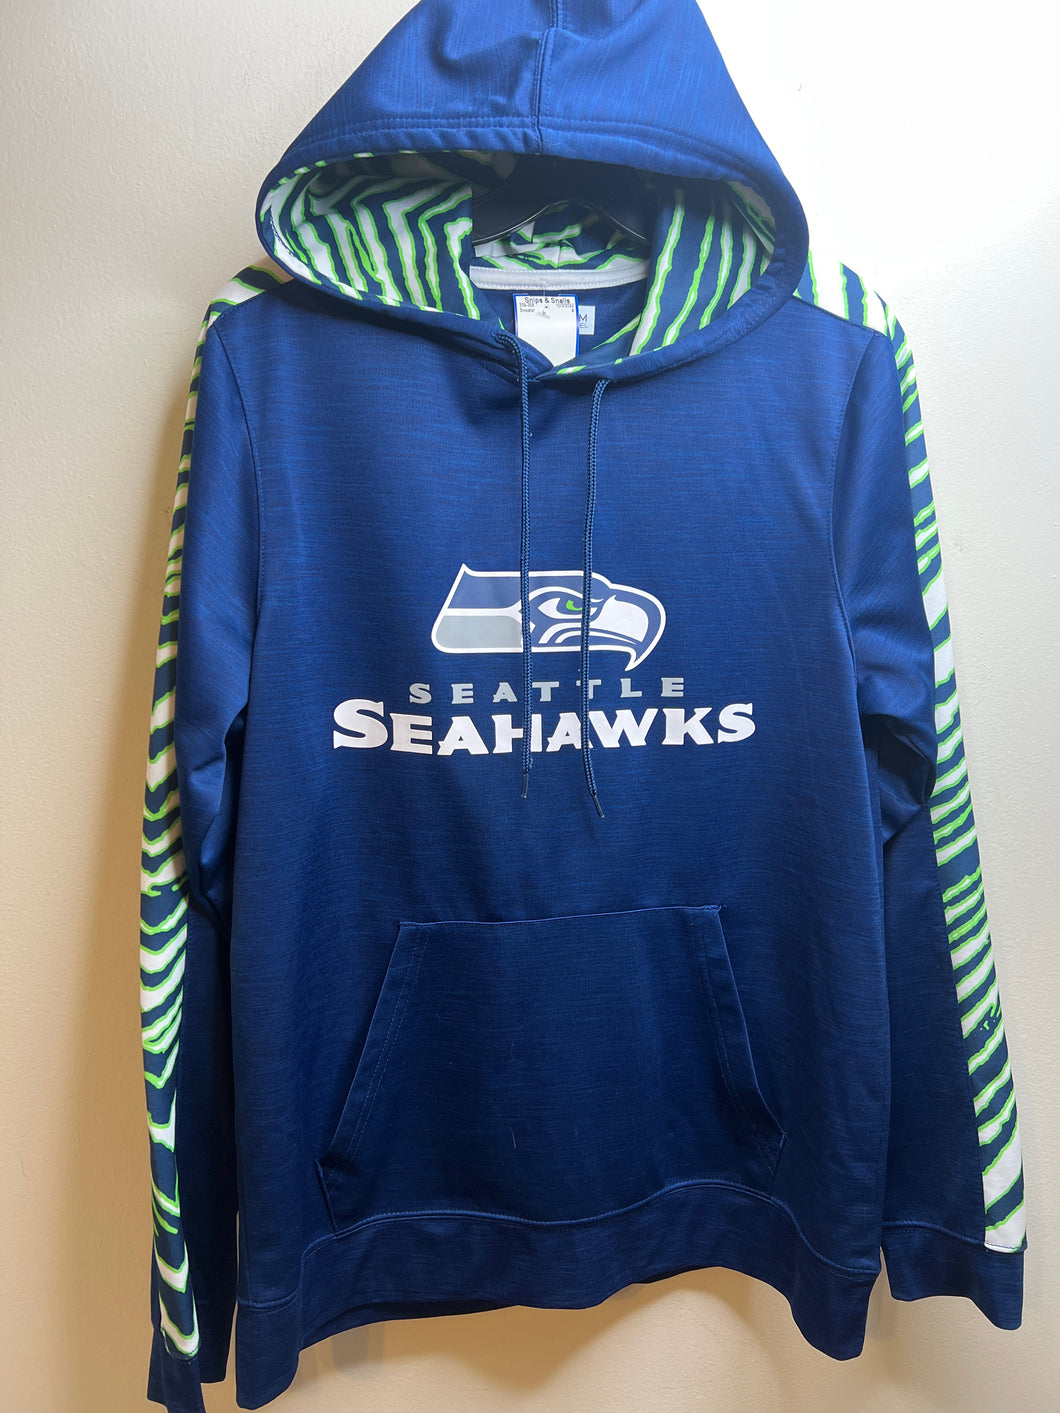 Mens Size S NFL Seahawks  Sweater